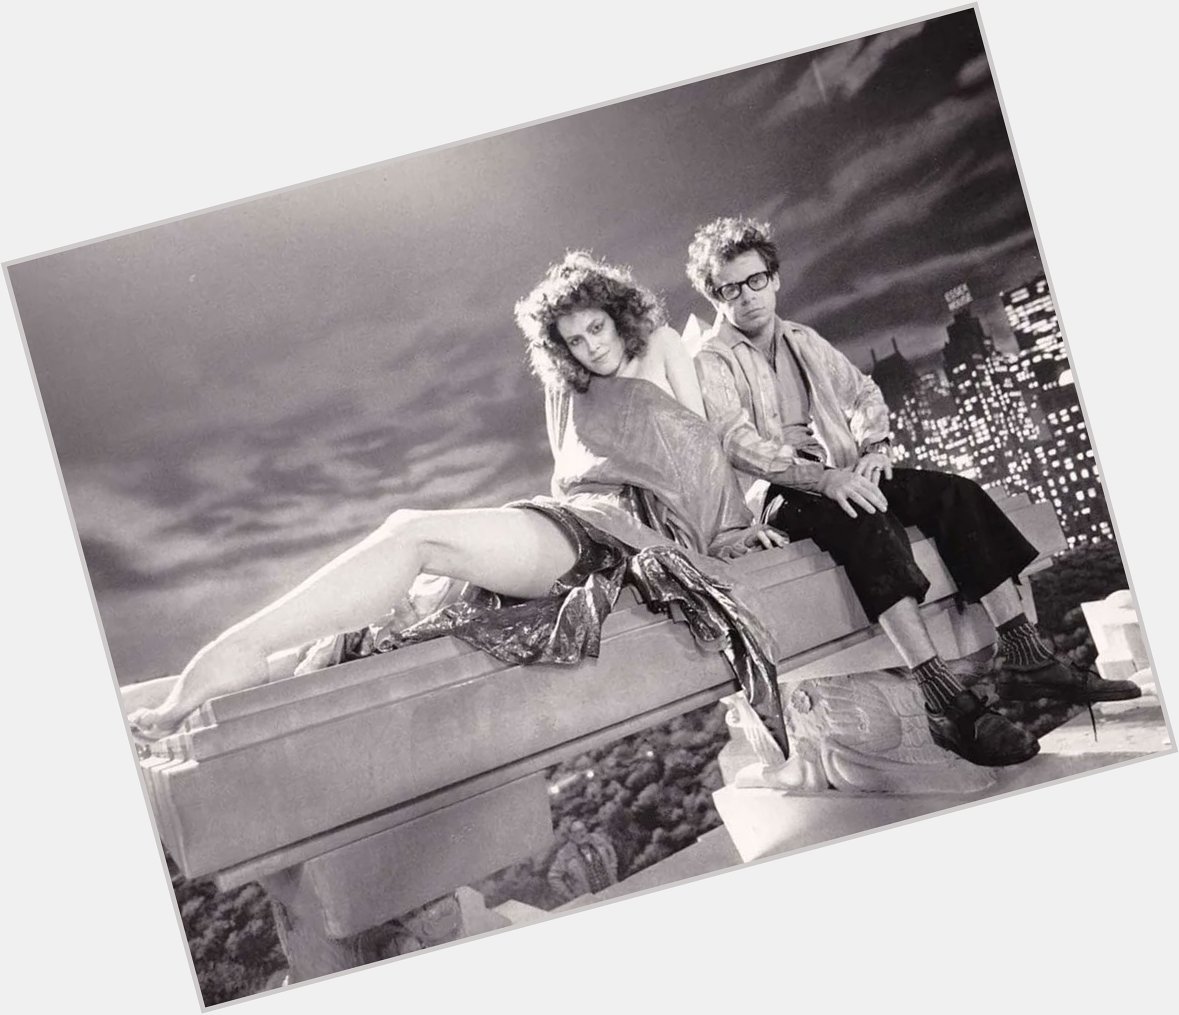 A very happy 70th birthday to Rick Moranis. Pictured here with Sigourney Weaver on the set of Ghostbusters, 1984. 